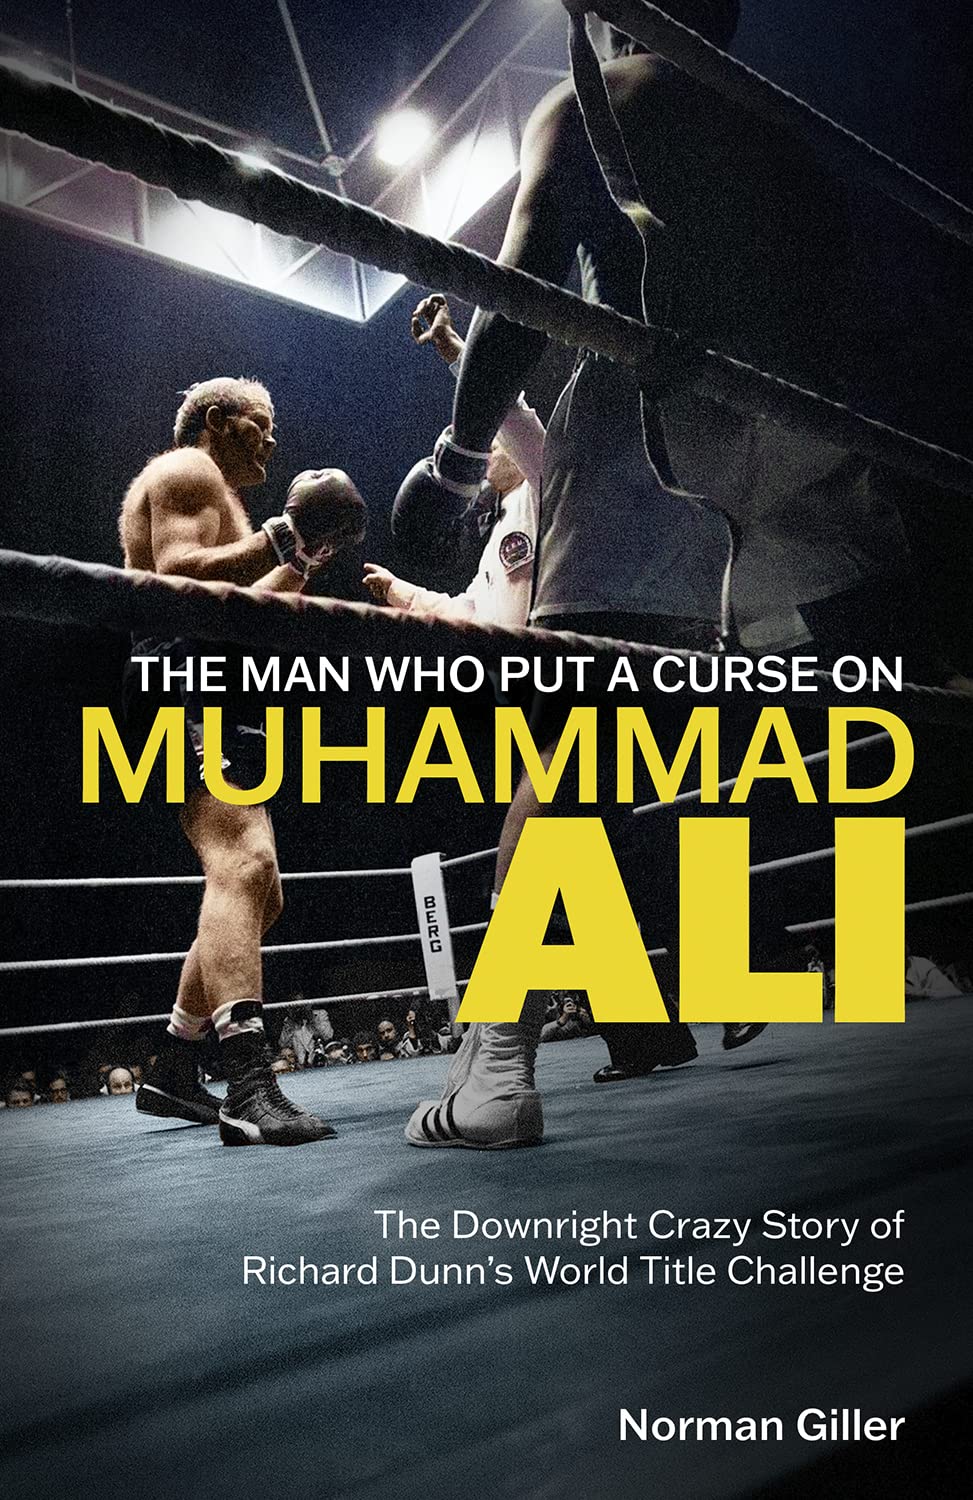 The_man_who_put_a_curse_on_muhammad_ali_paperback_book